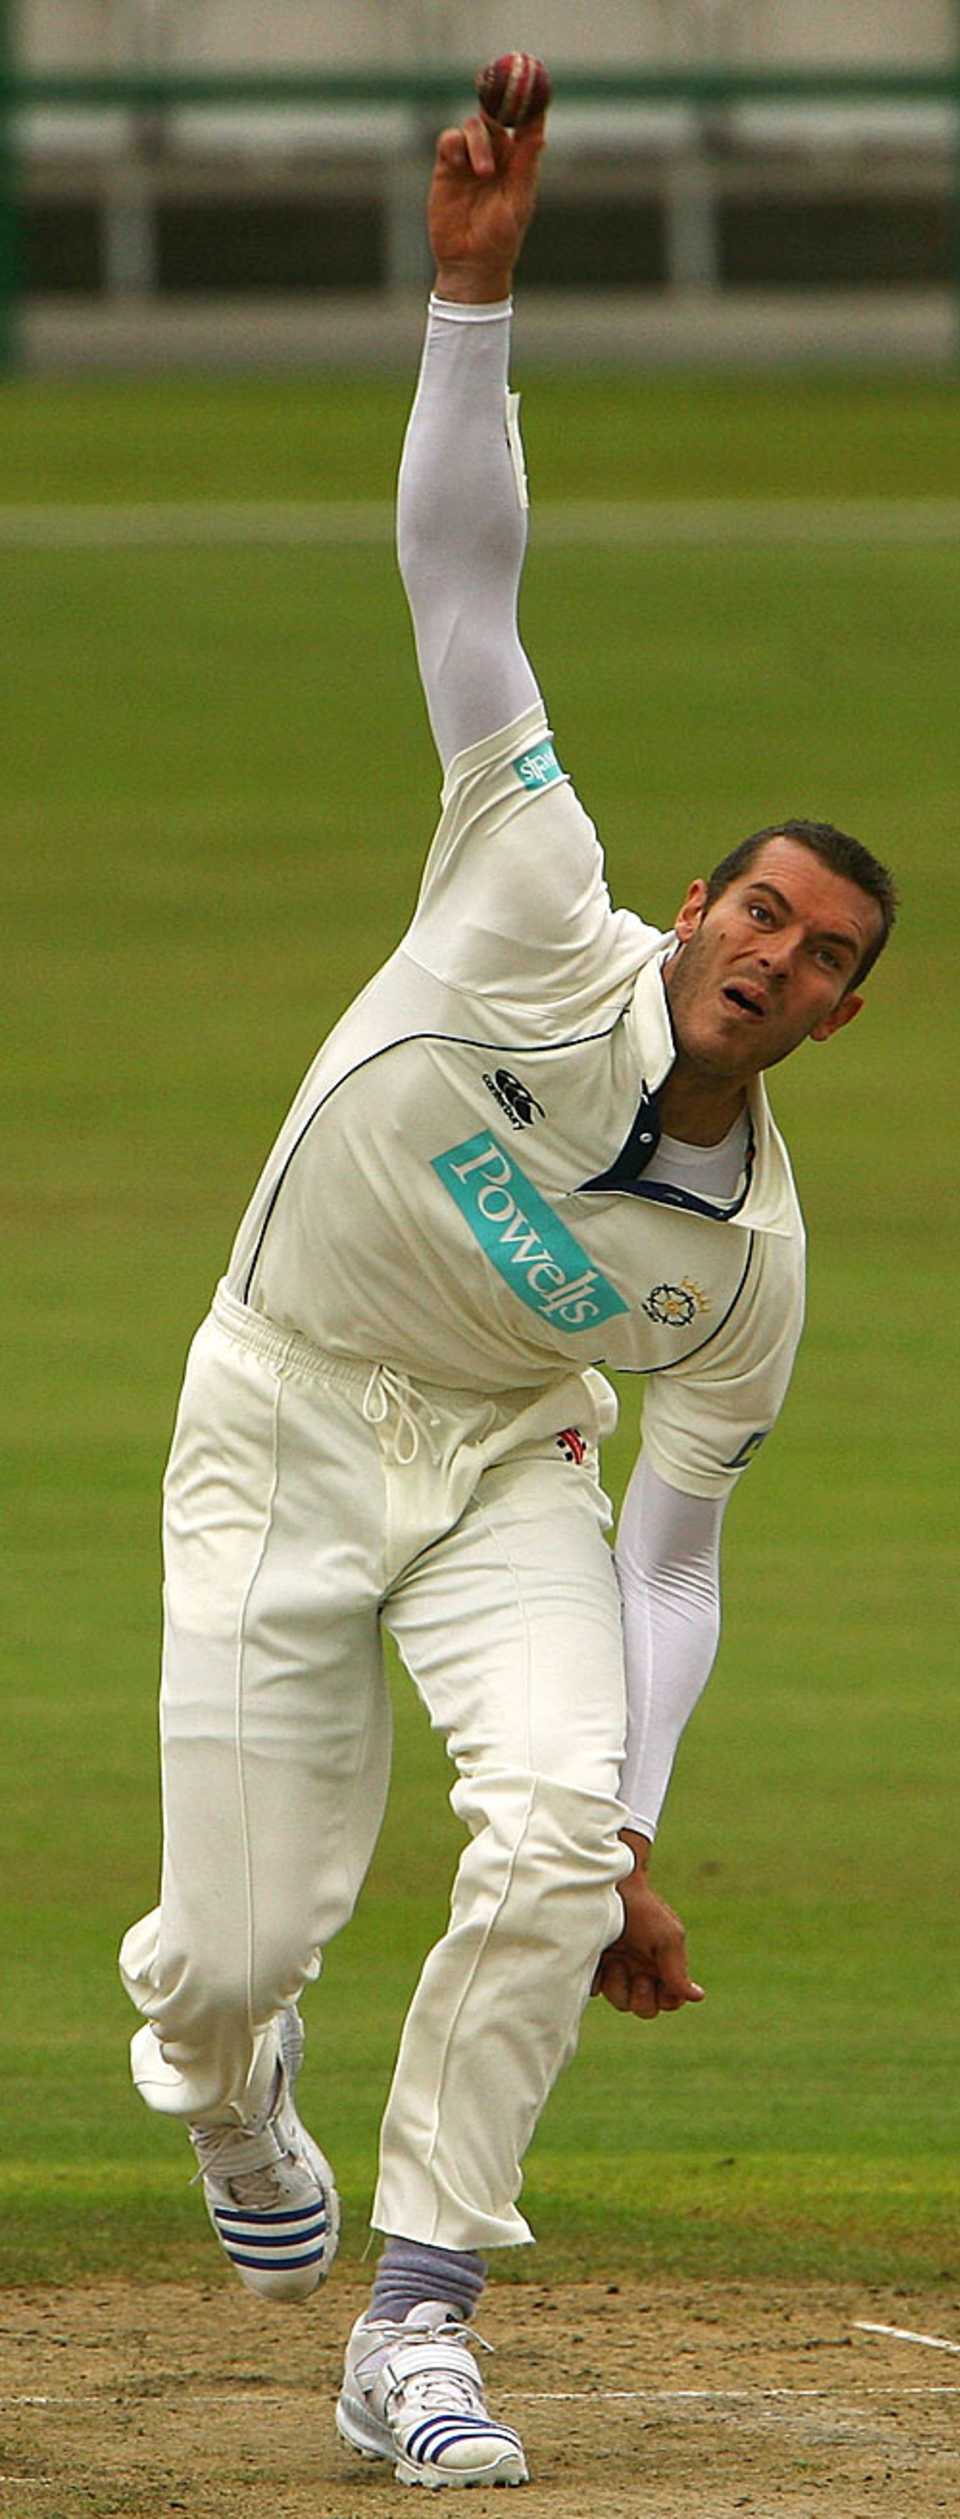 Chris Tremlett in his delivery stride for Hampshire, Lancashire v Hampshire, County Championship, Old Trafford, July 22, 2008